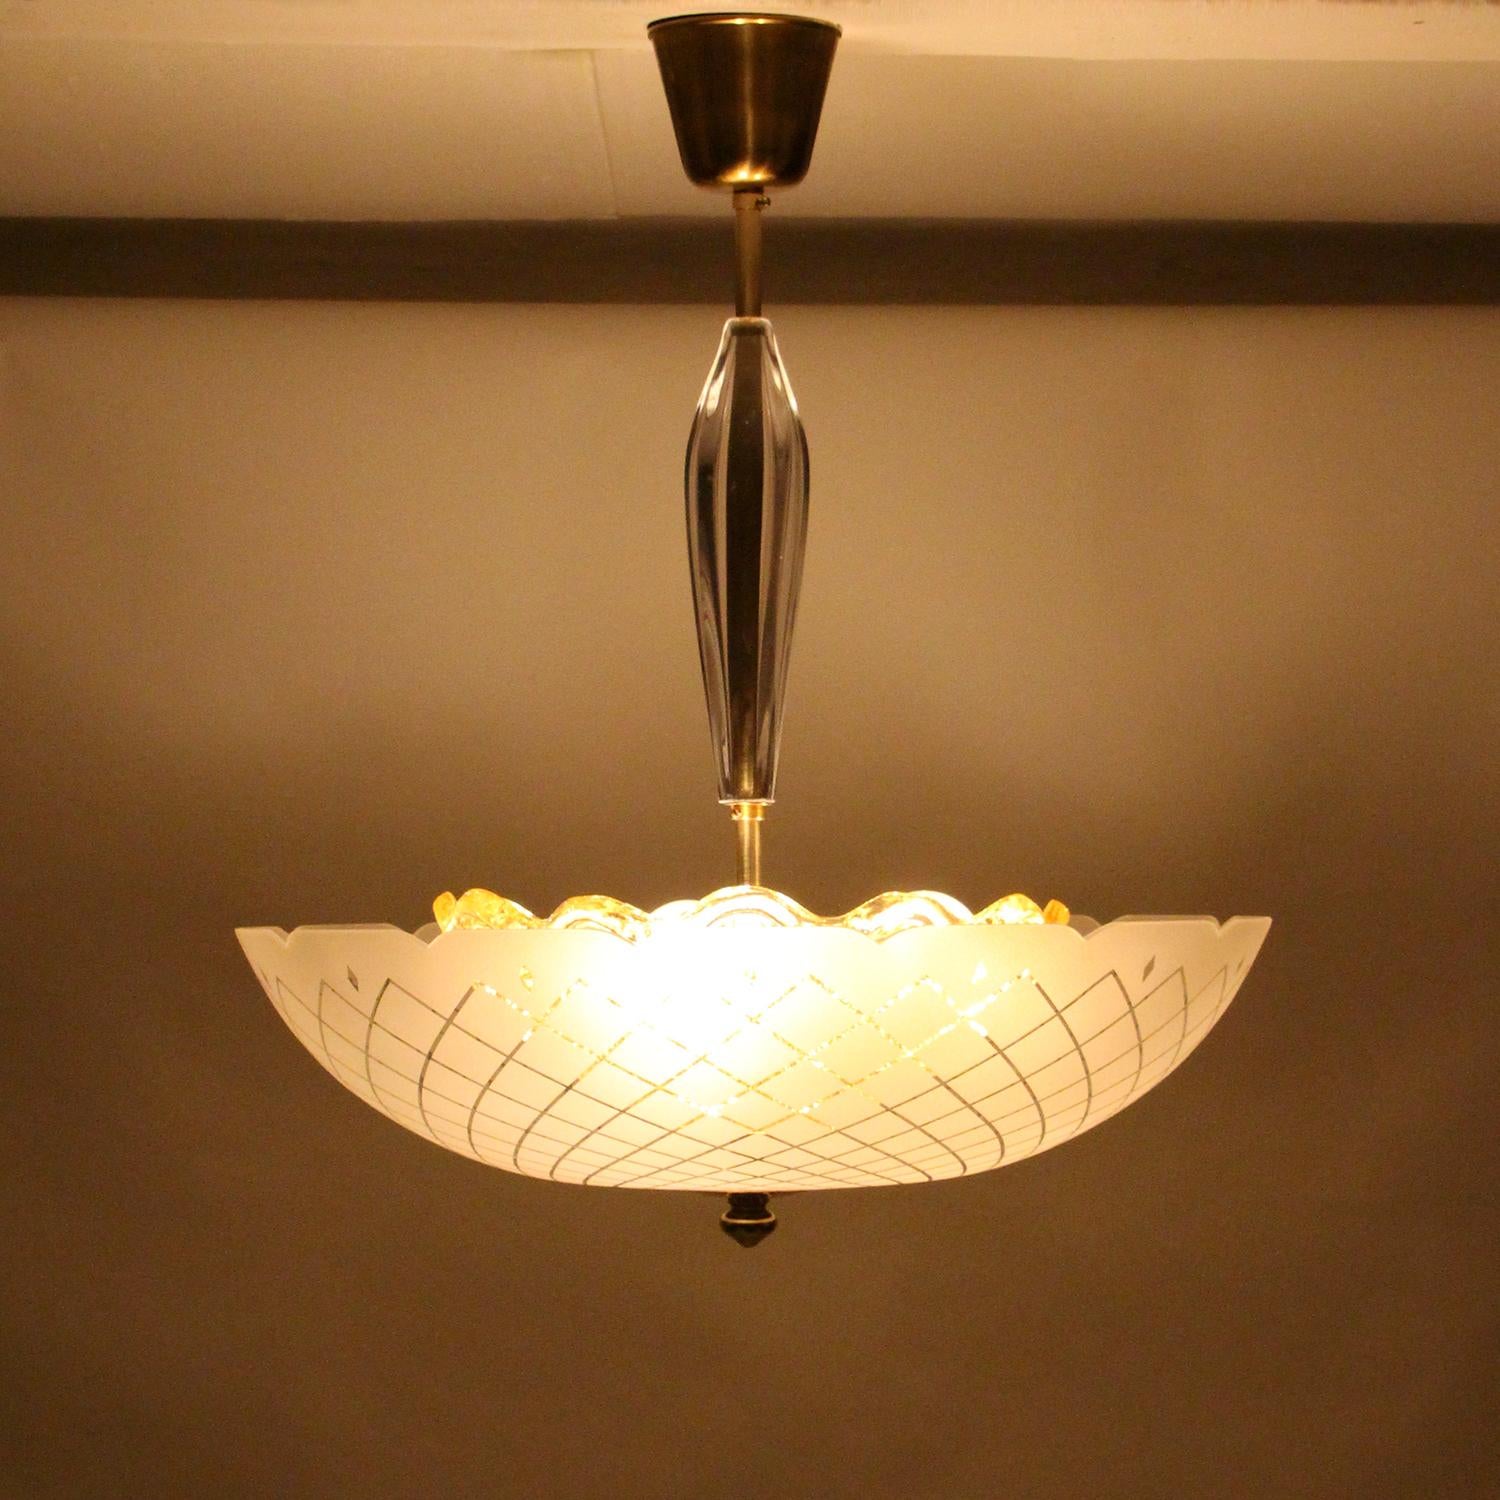 Orrefors chandelier by Lyfa/Orrefors in the late 1950s, most likely designed by Carl Fagerlund, who is famous, and celebrated, for his amazing crystal lights, Scandinavian midcentury crystal glass and brass ceiling flush light in very good vintage